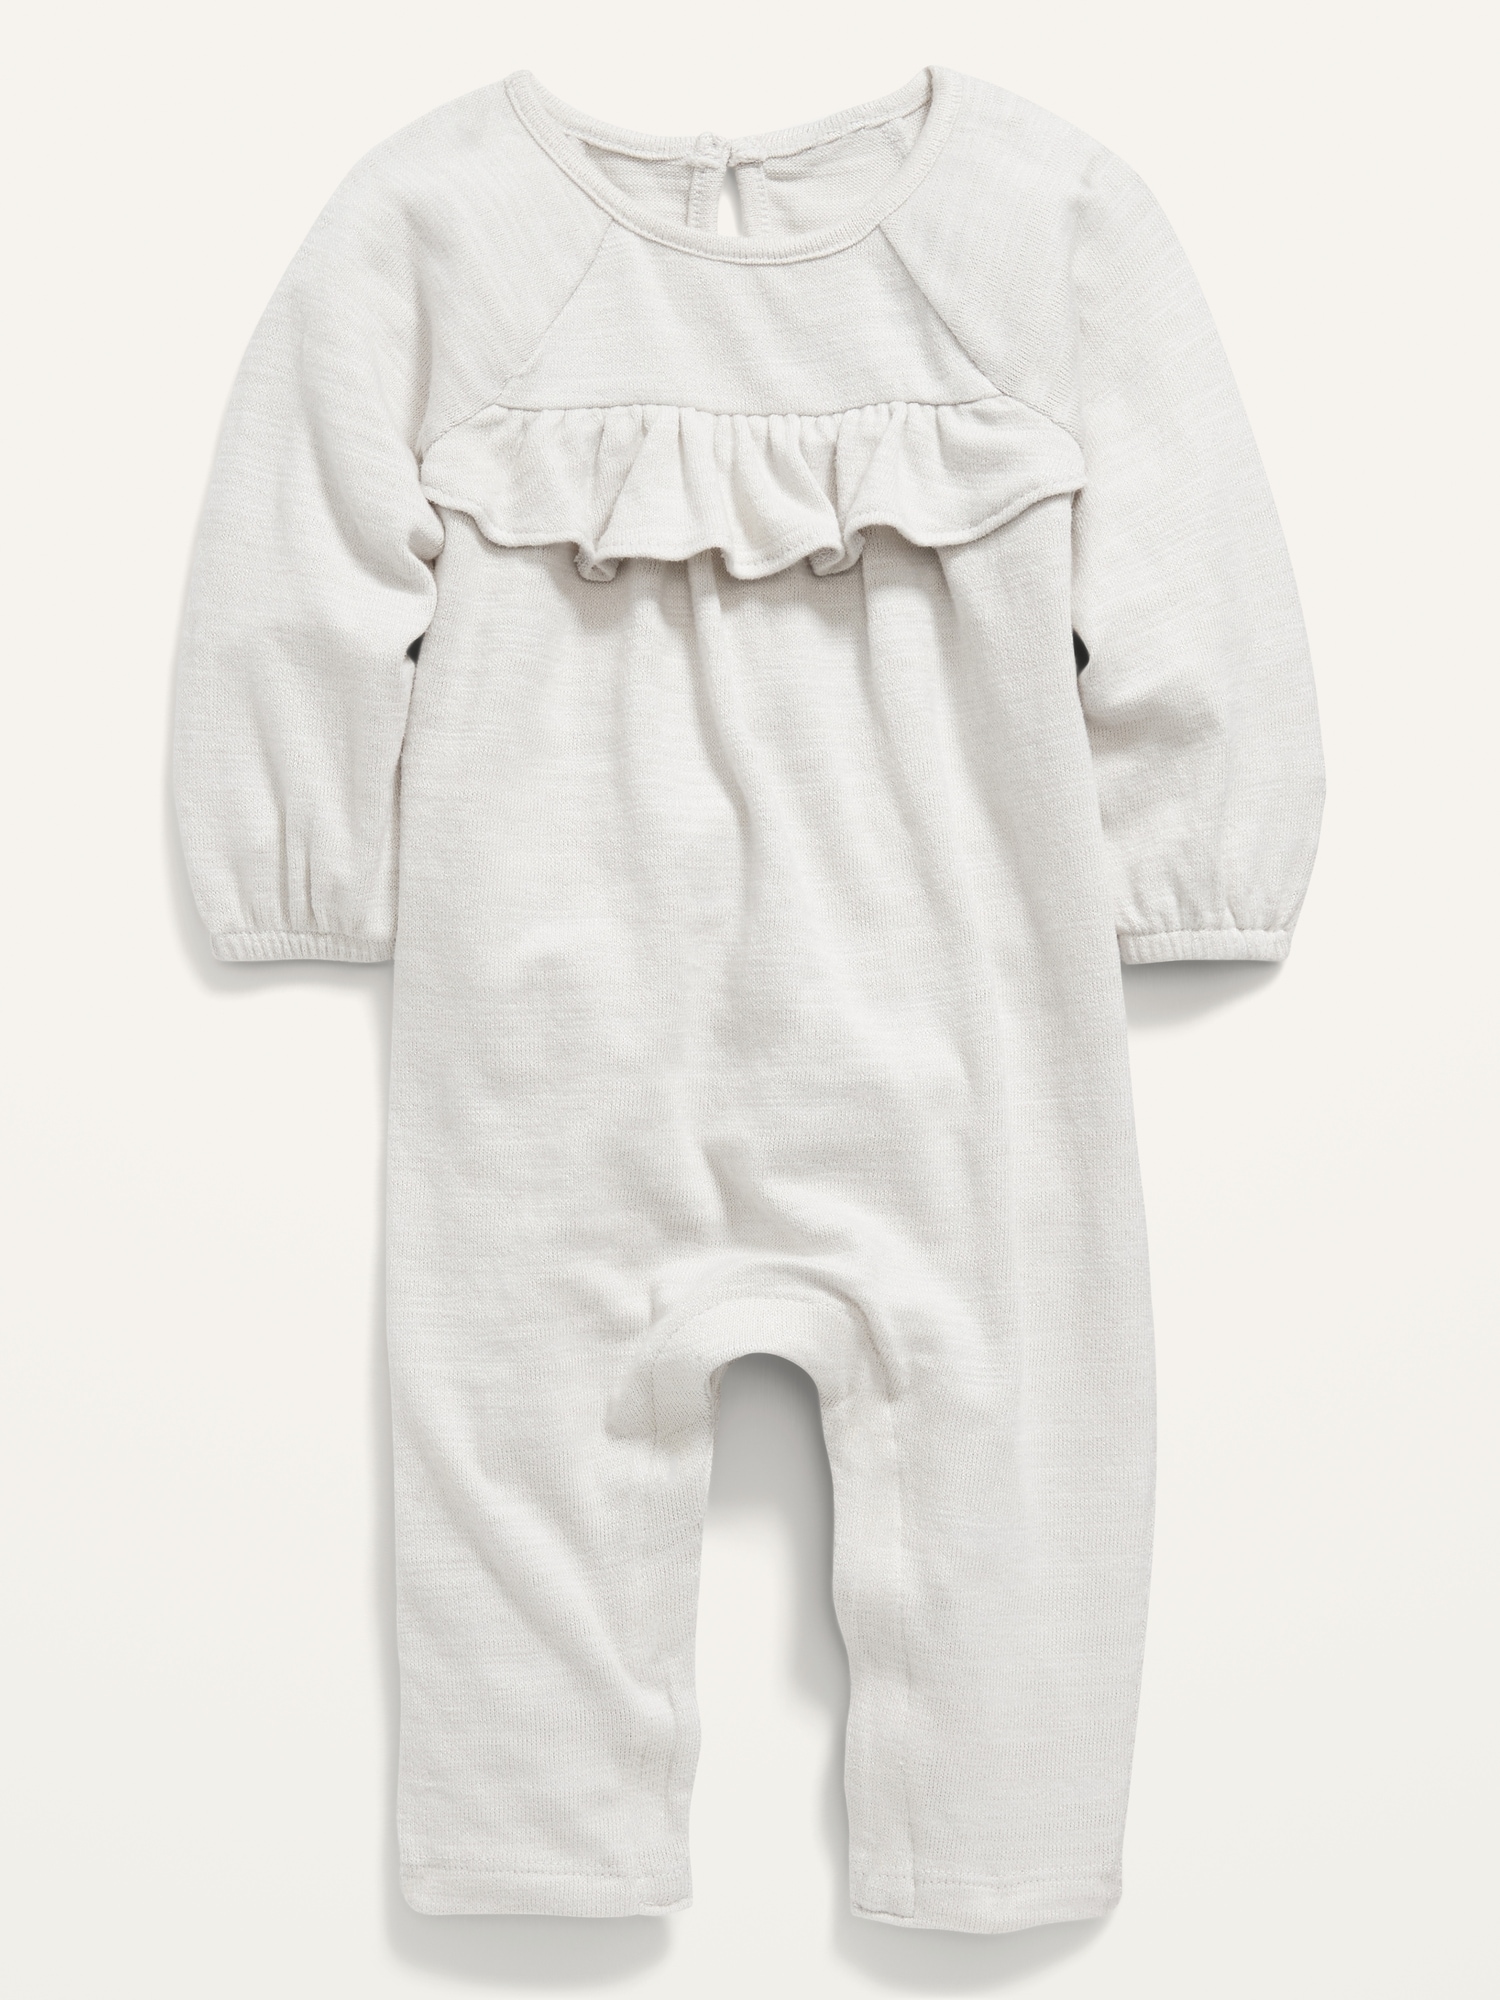 Cozy Long-Sleeve Ruffle-Trim Romper for Baby | Old Navy